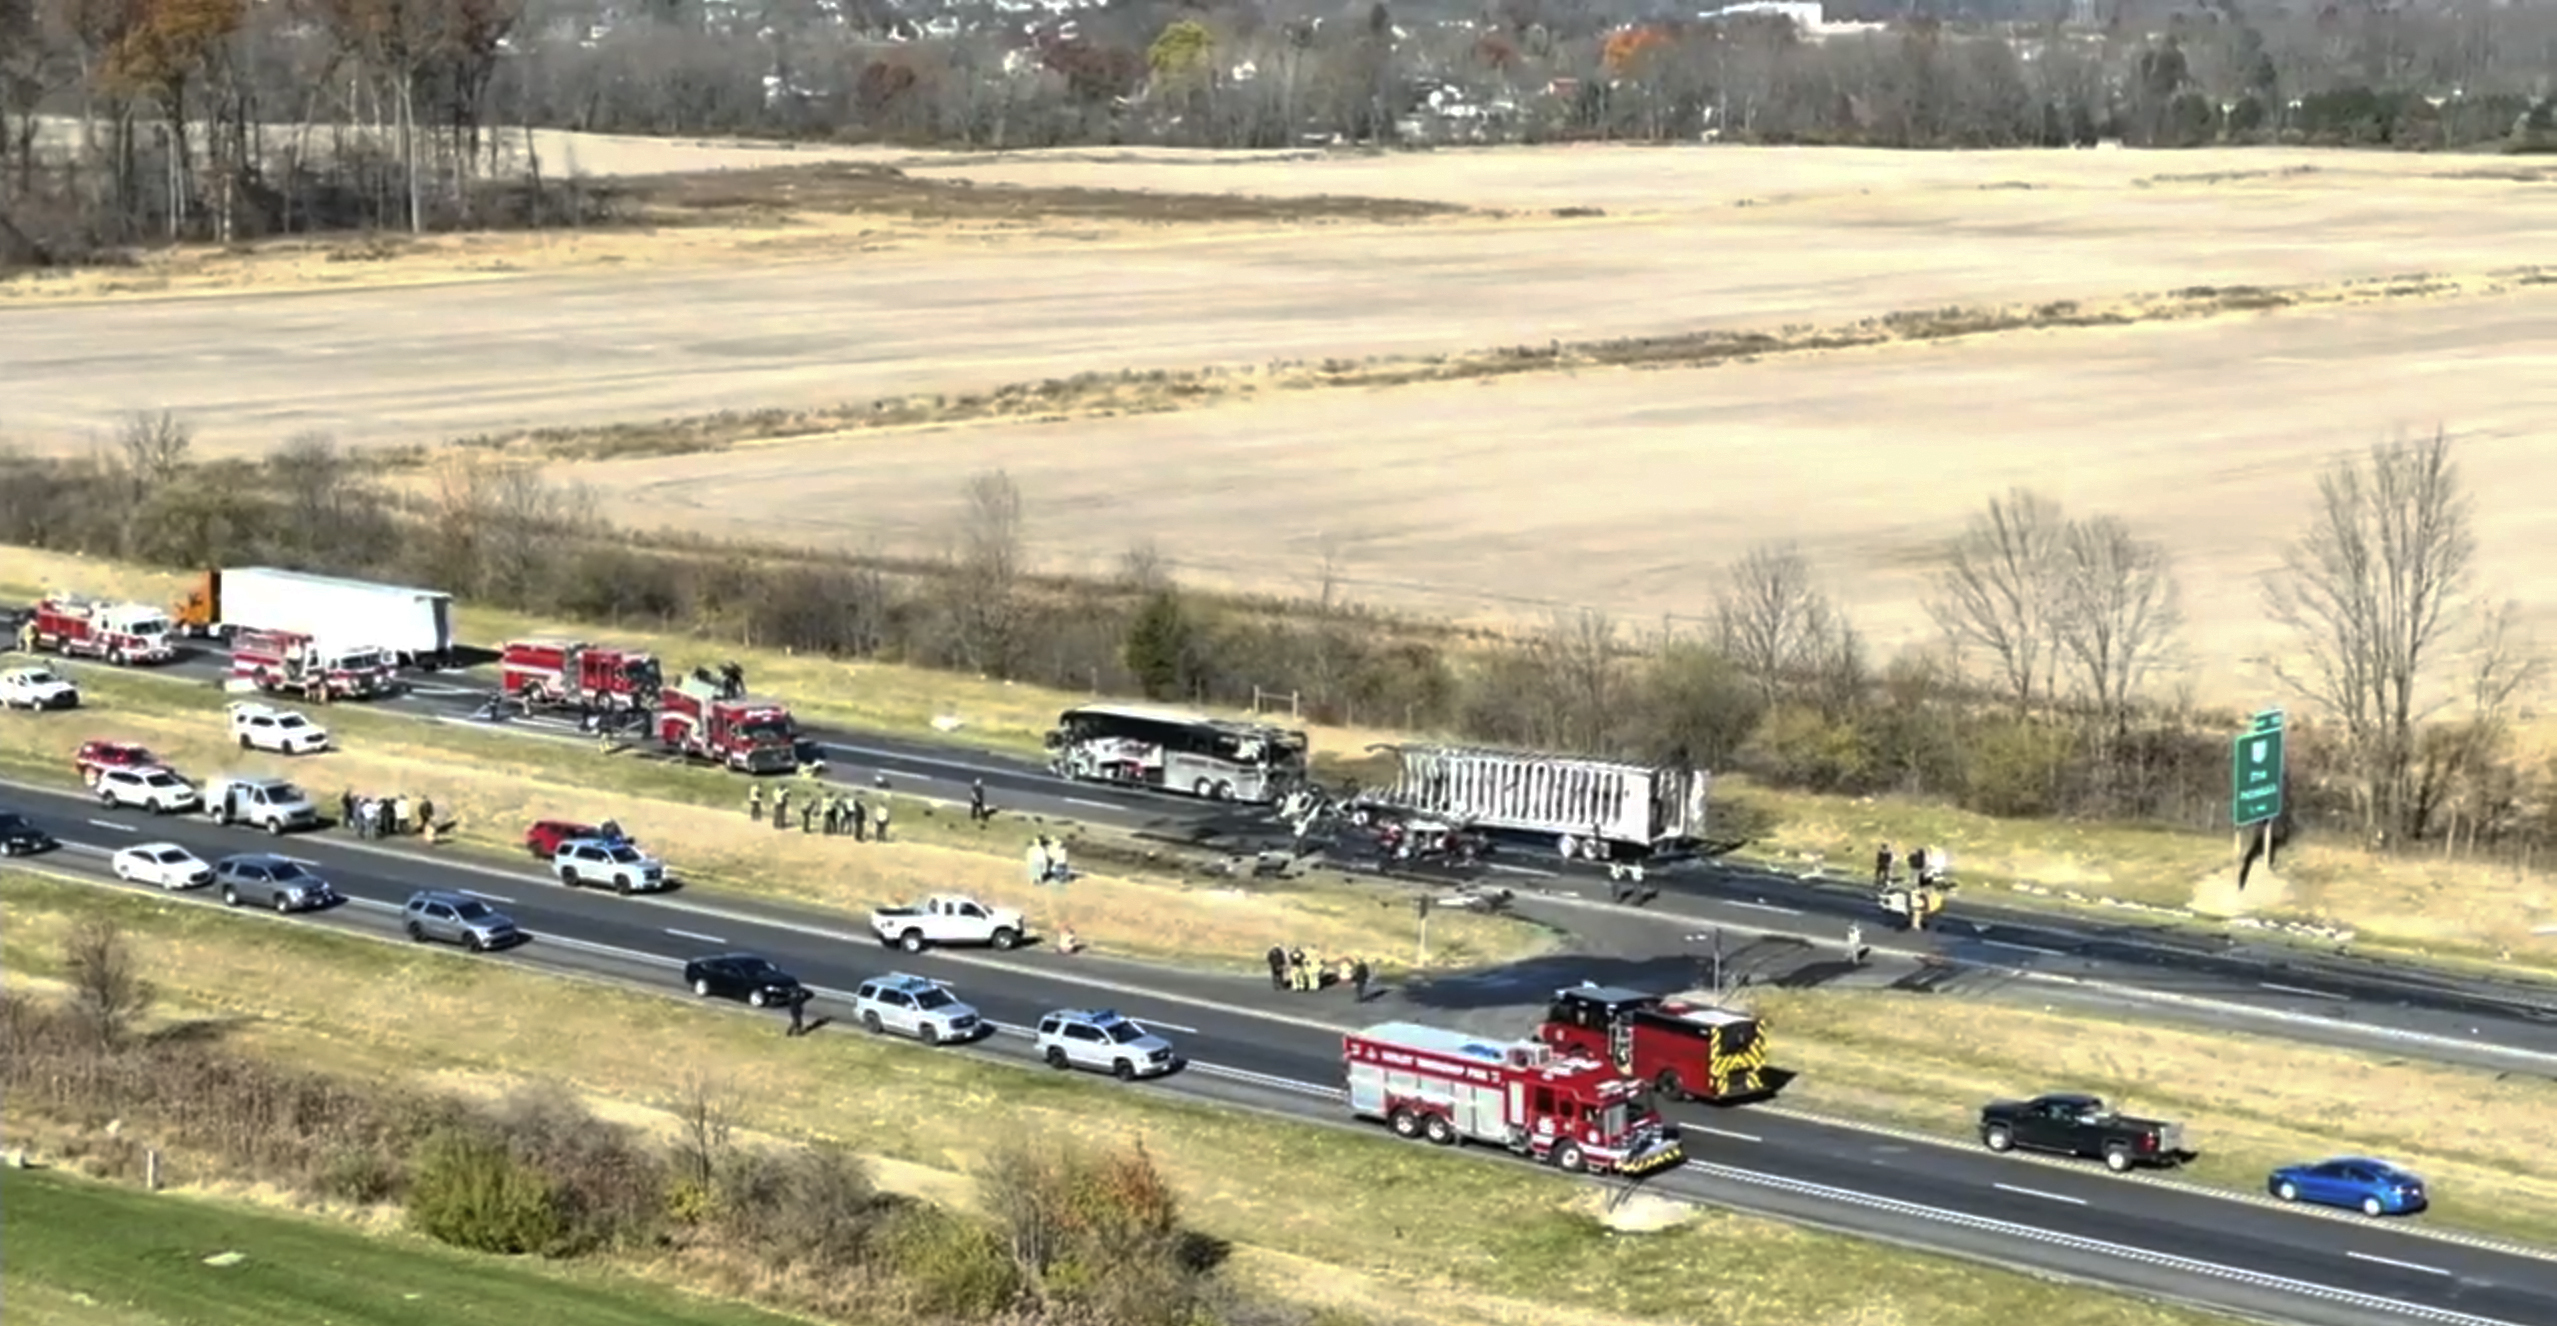 Emergency responders work the scene after a semi-truck crashed into a charter bus carrying high school students in Licking County, Ohio, on Nov. 14.